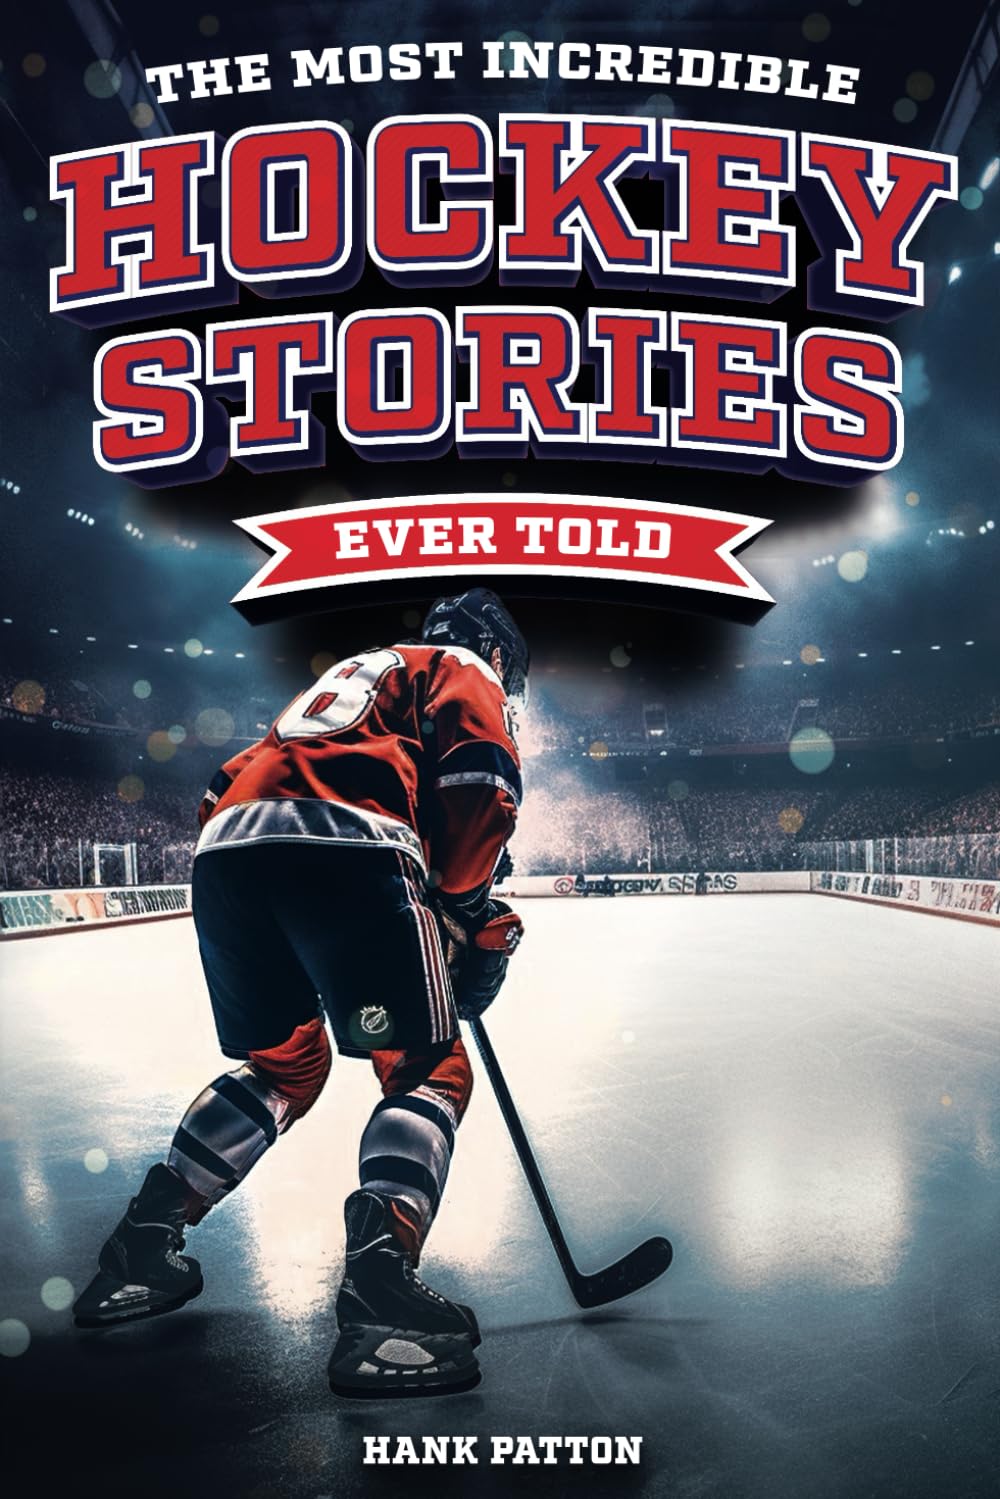 The Most Incredible Hockey Stories Ever Told [162 페이지]